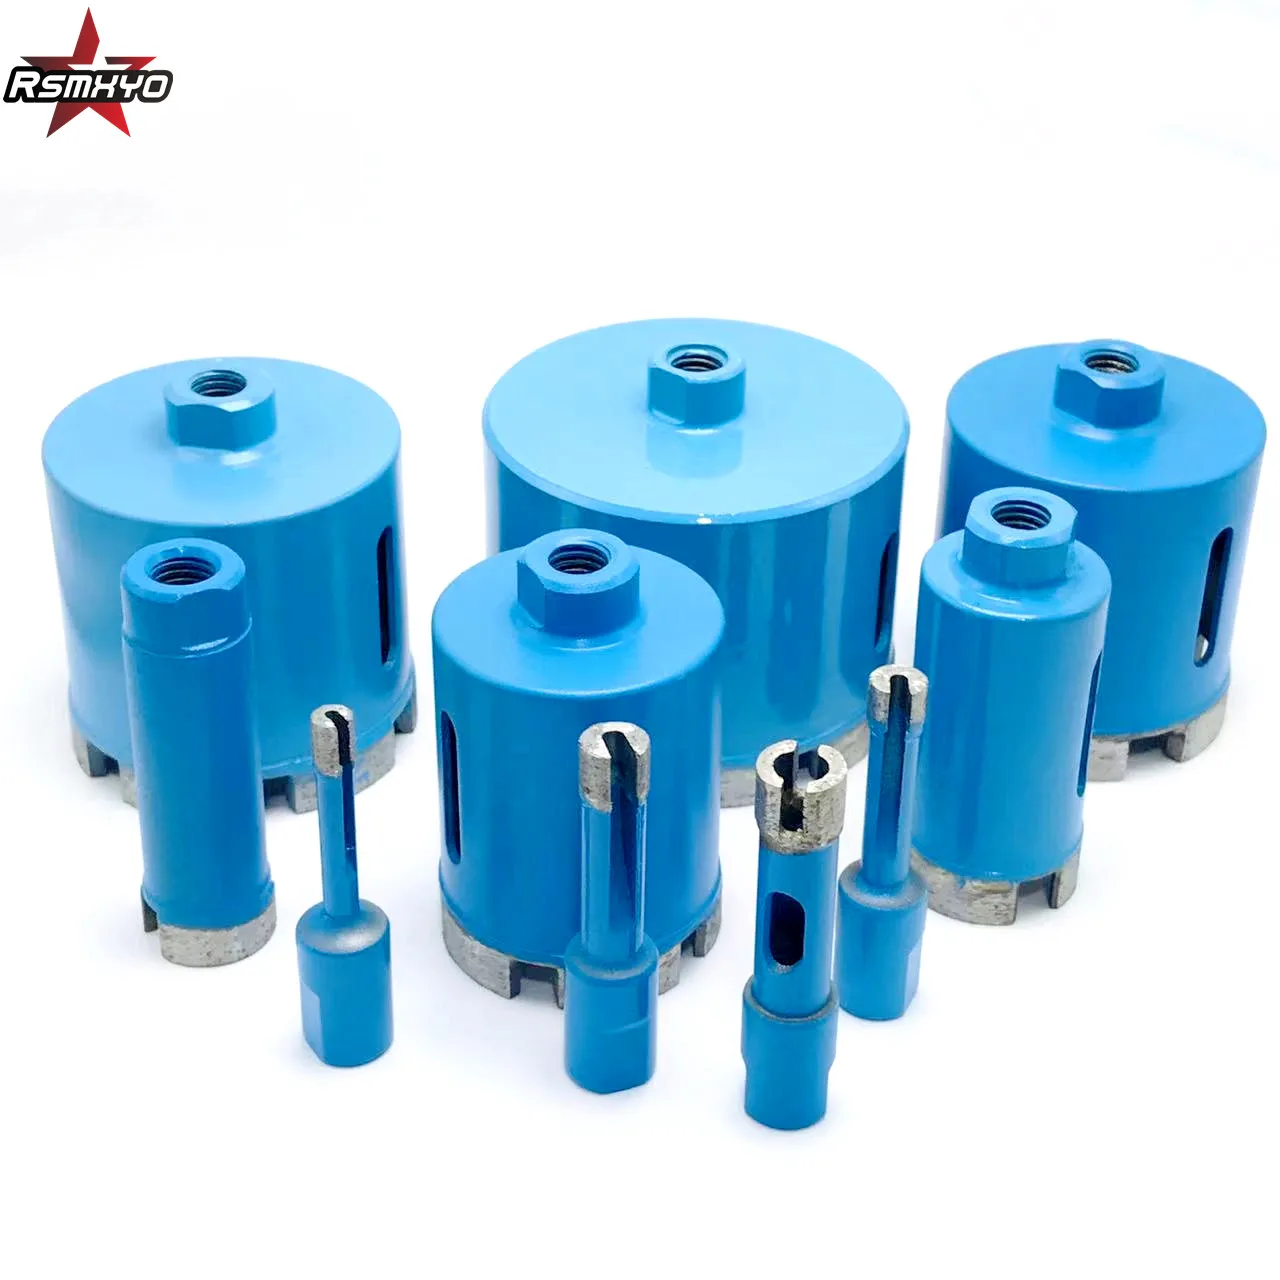 1pcs M10 Angle Grinder 6-75mm Blue Diamond Drill Cutter Saw Core Drill Bit Hole Opener For Marble Granite Tile Ceramic Concrete